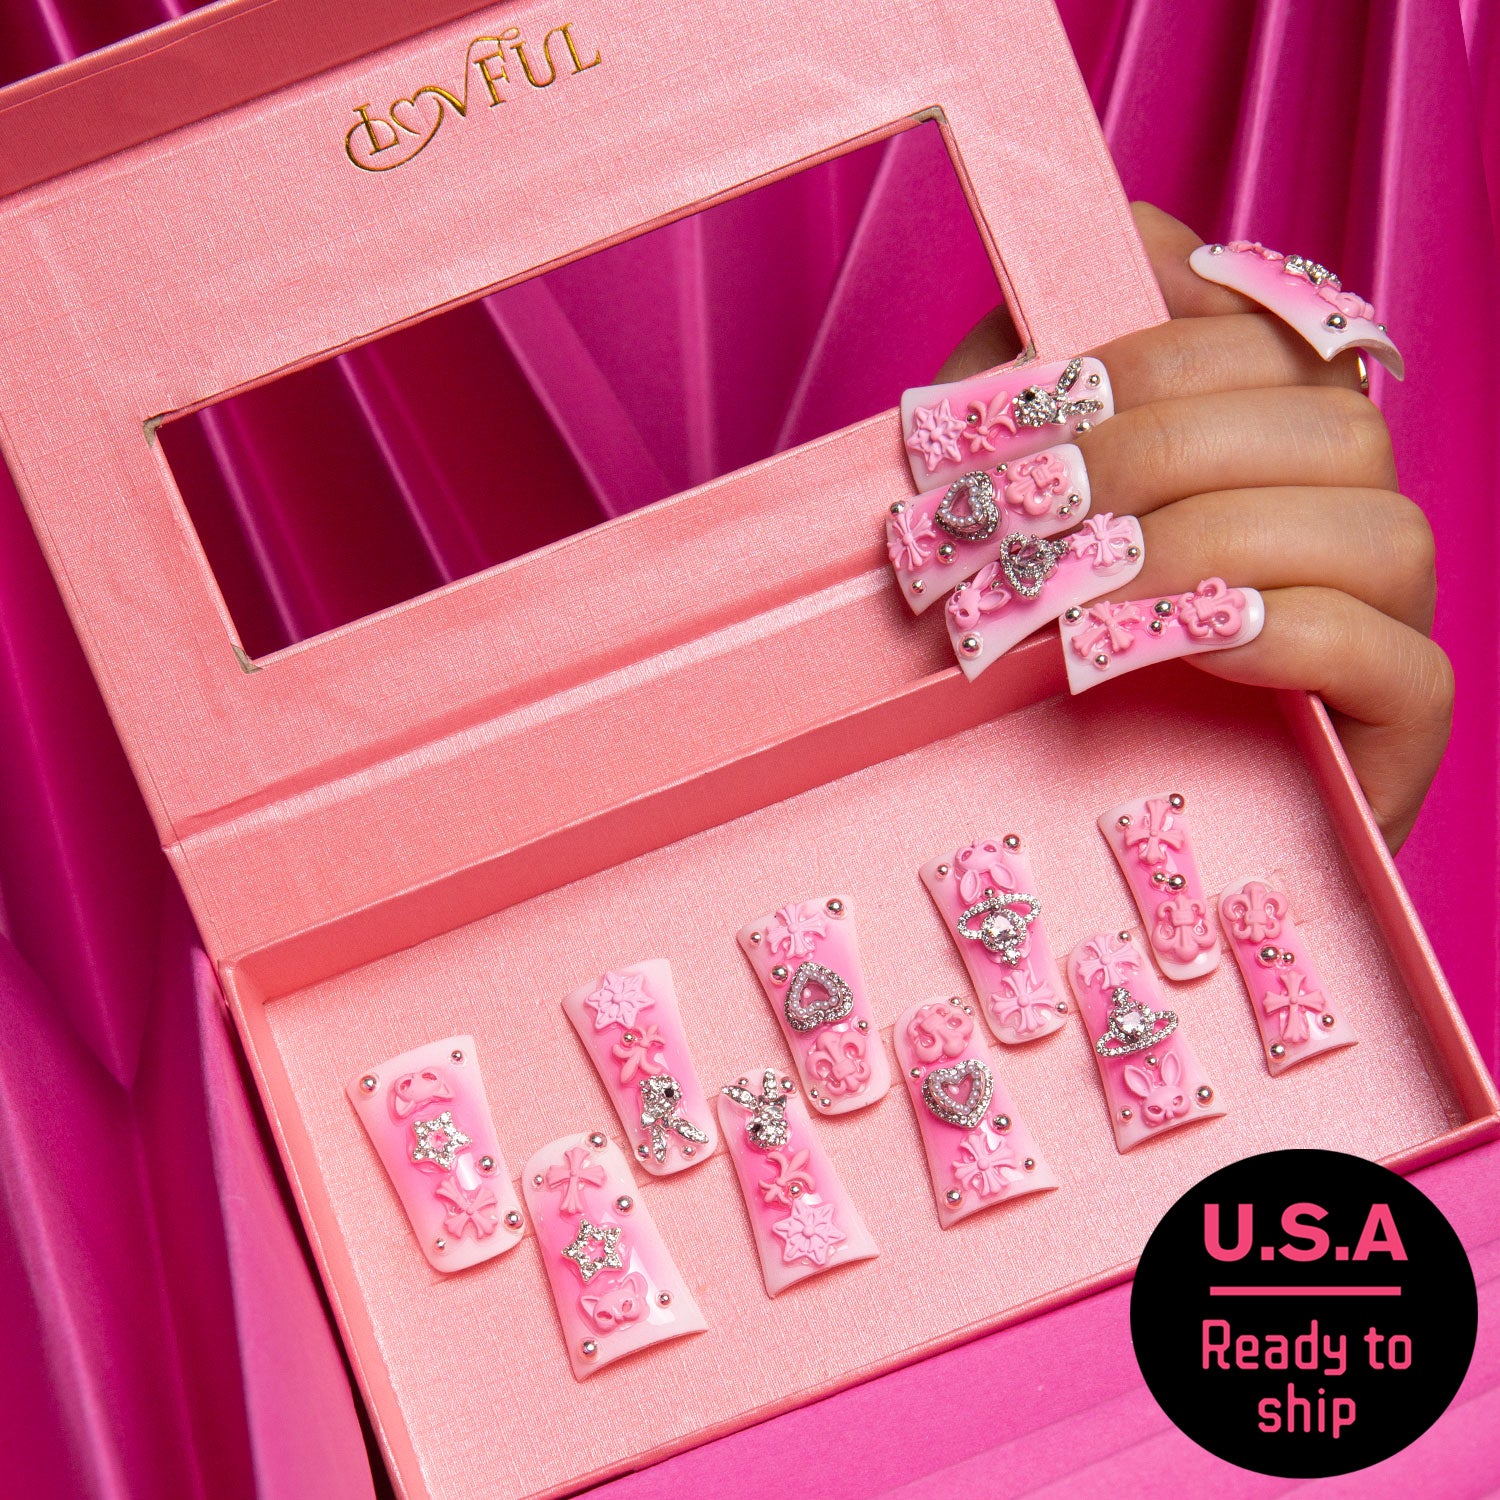 Pink Bliss Blush press-on nails by Lovful in a pink box with rhinestone decorations, hearts, and stars. Includes 'U.S.A Ready to ship' badge